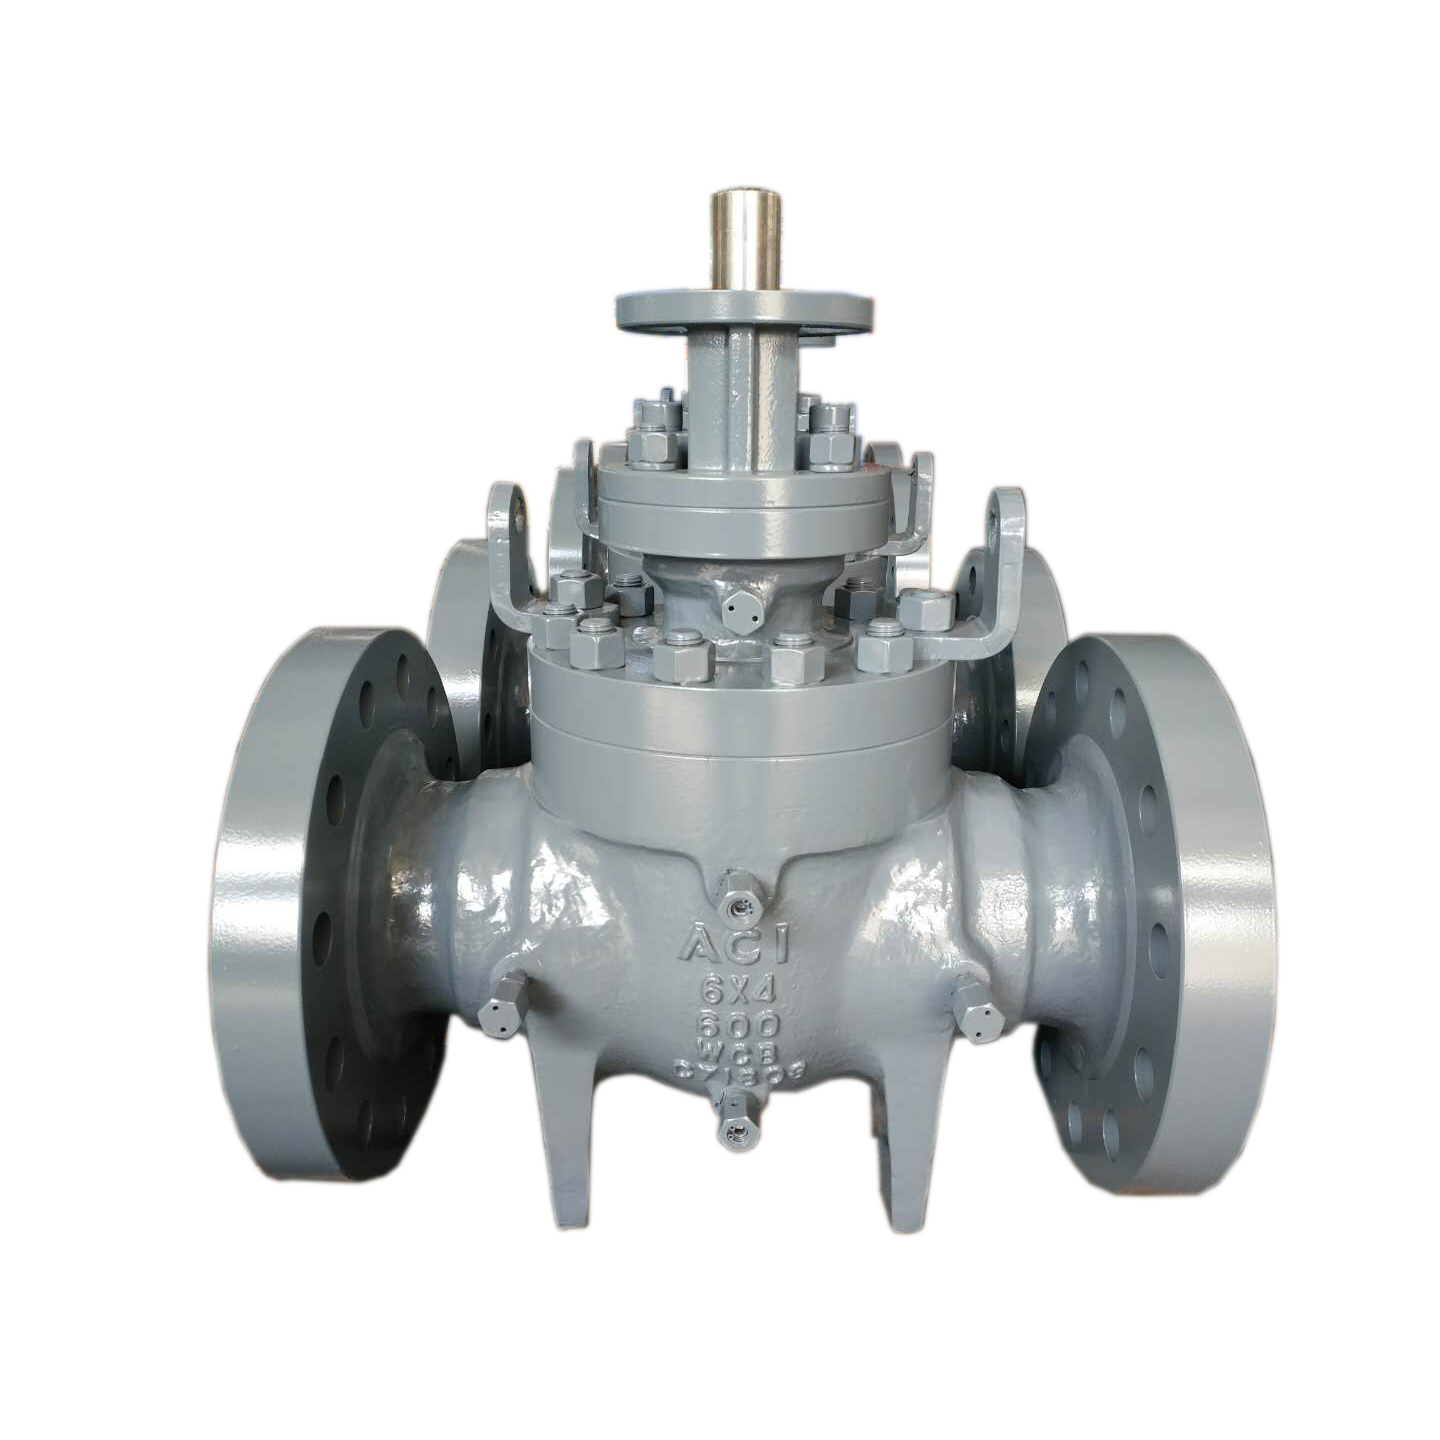 Valworx Releases New Product Line: Dual-Certified Stainless Steel Flange Valves |                                     Newswire